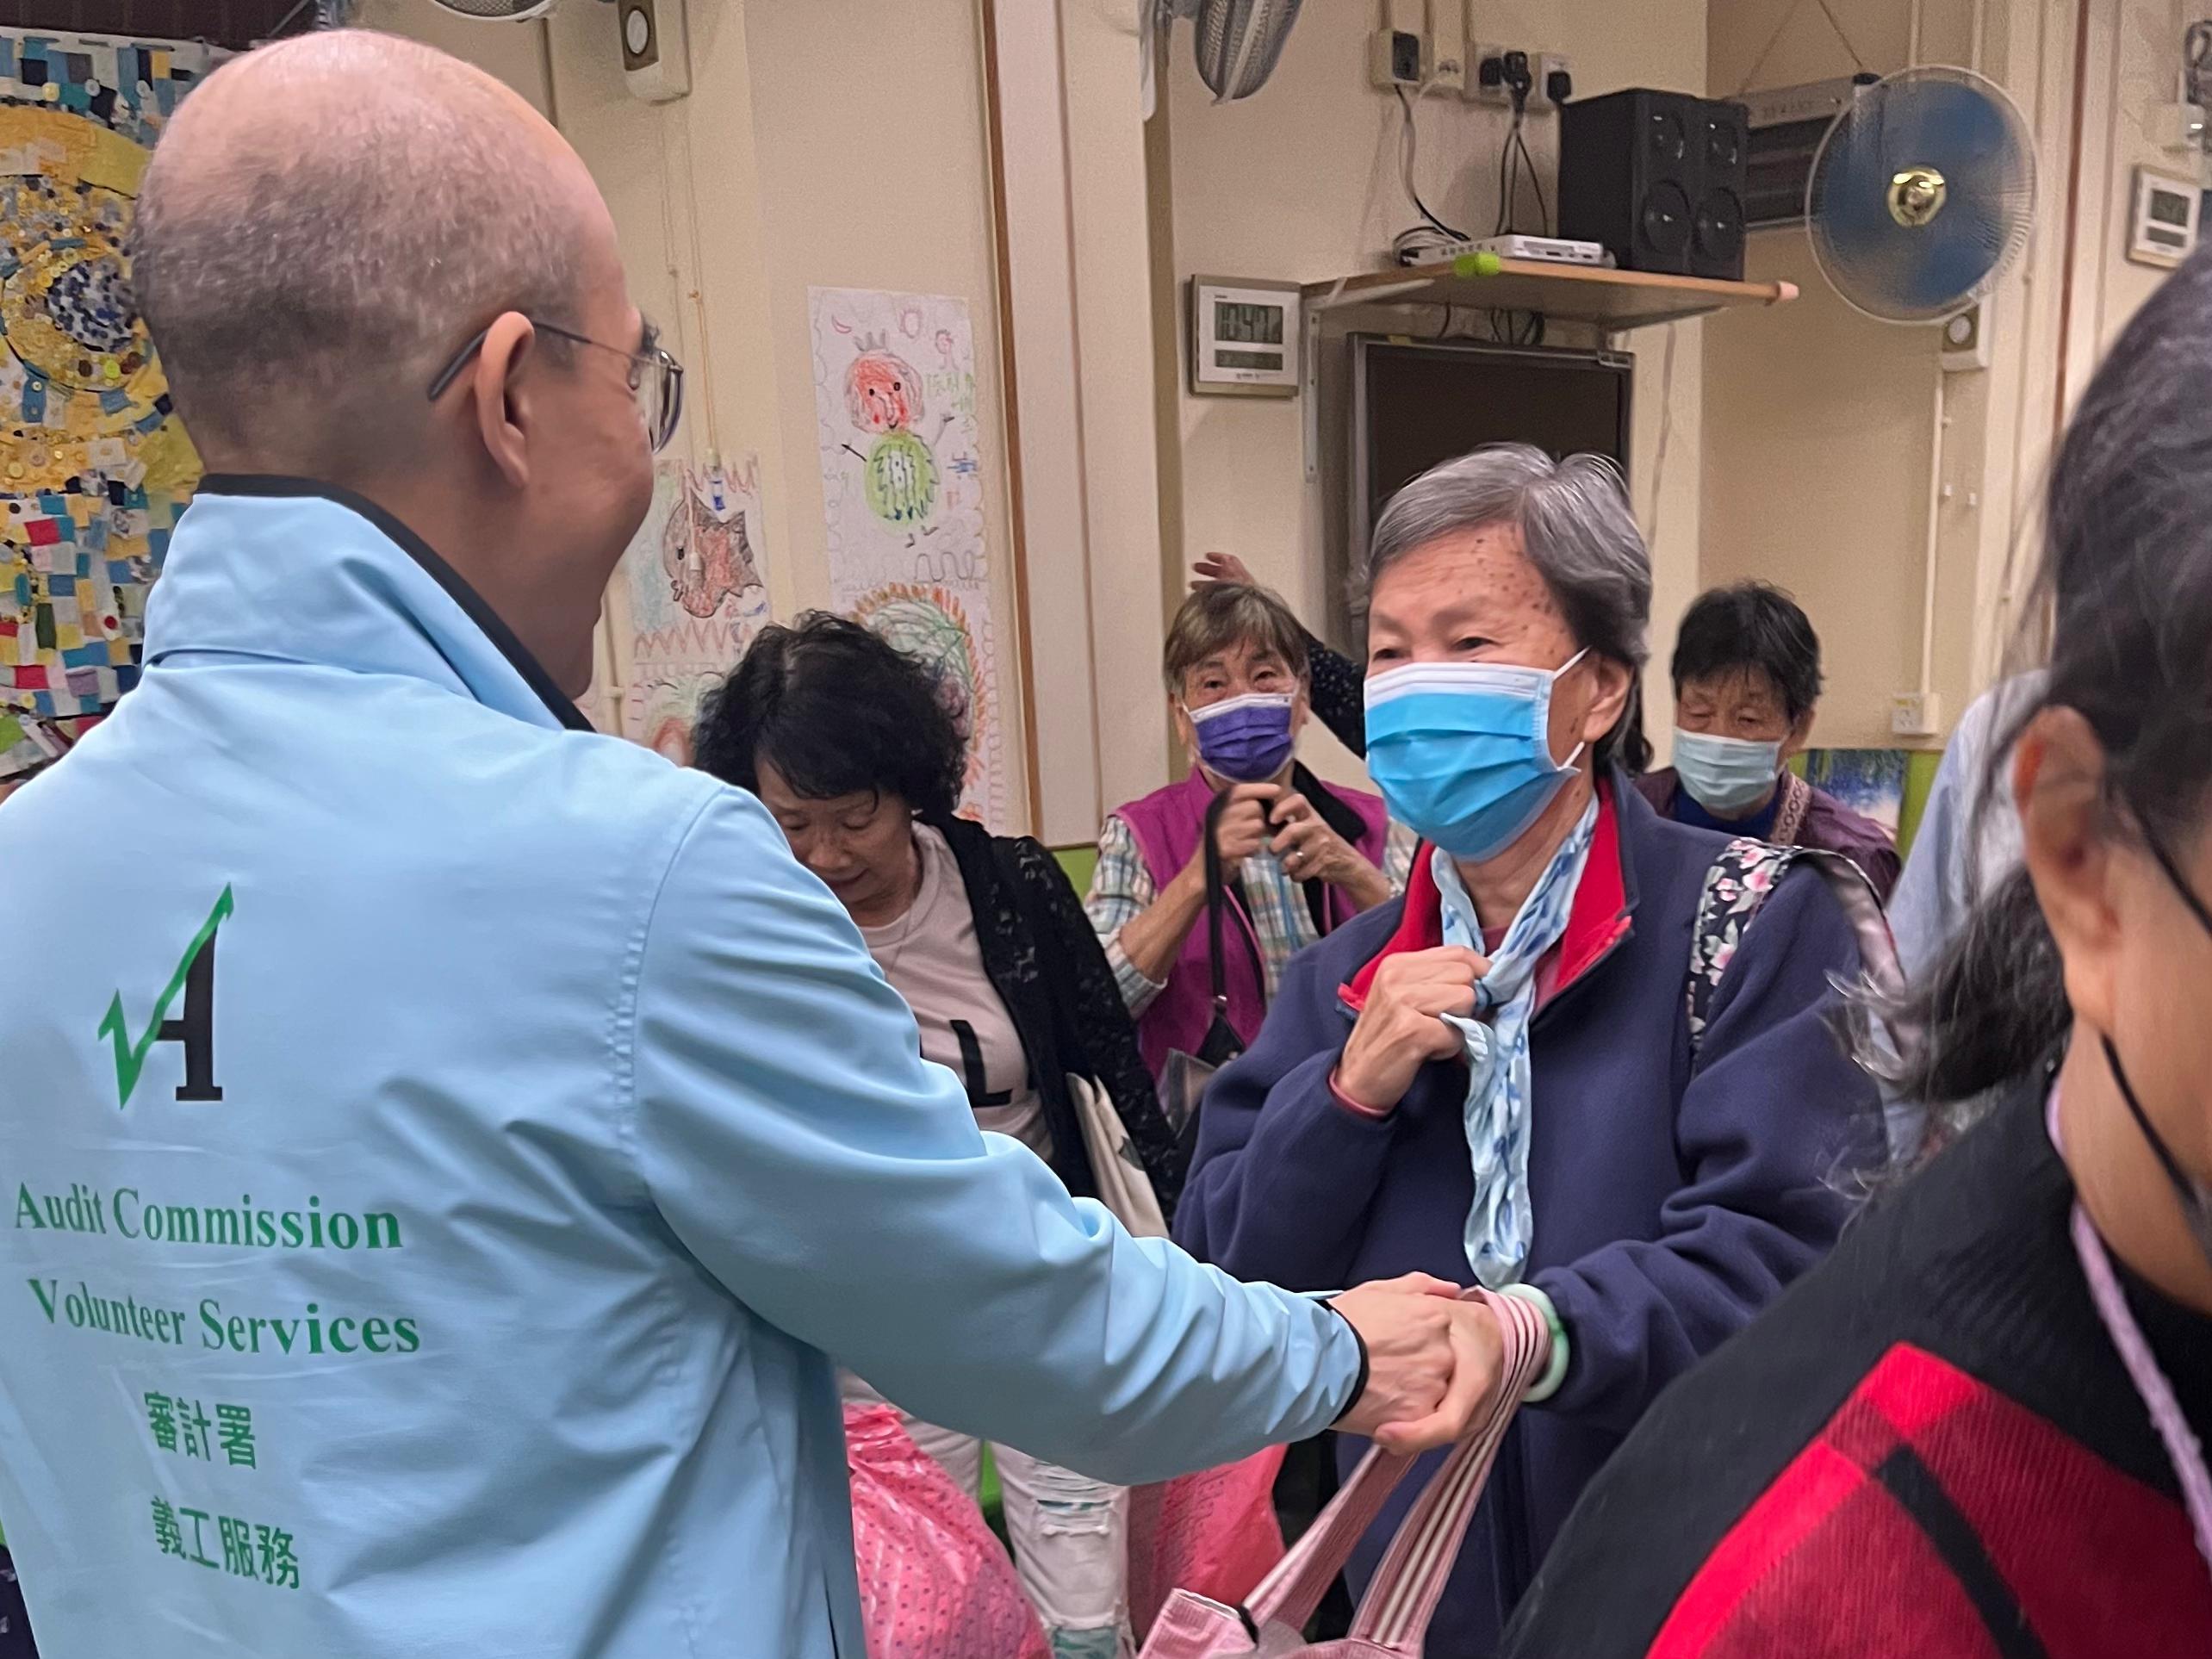 Around 30 volunteers from the Audit Commission takes part in volunteer visit to elderly centre and District Council election promotion activity today (December 2). Photo shows a volunteer from the Audit Commission chatting with an elderly.    